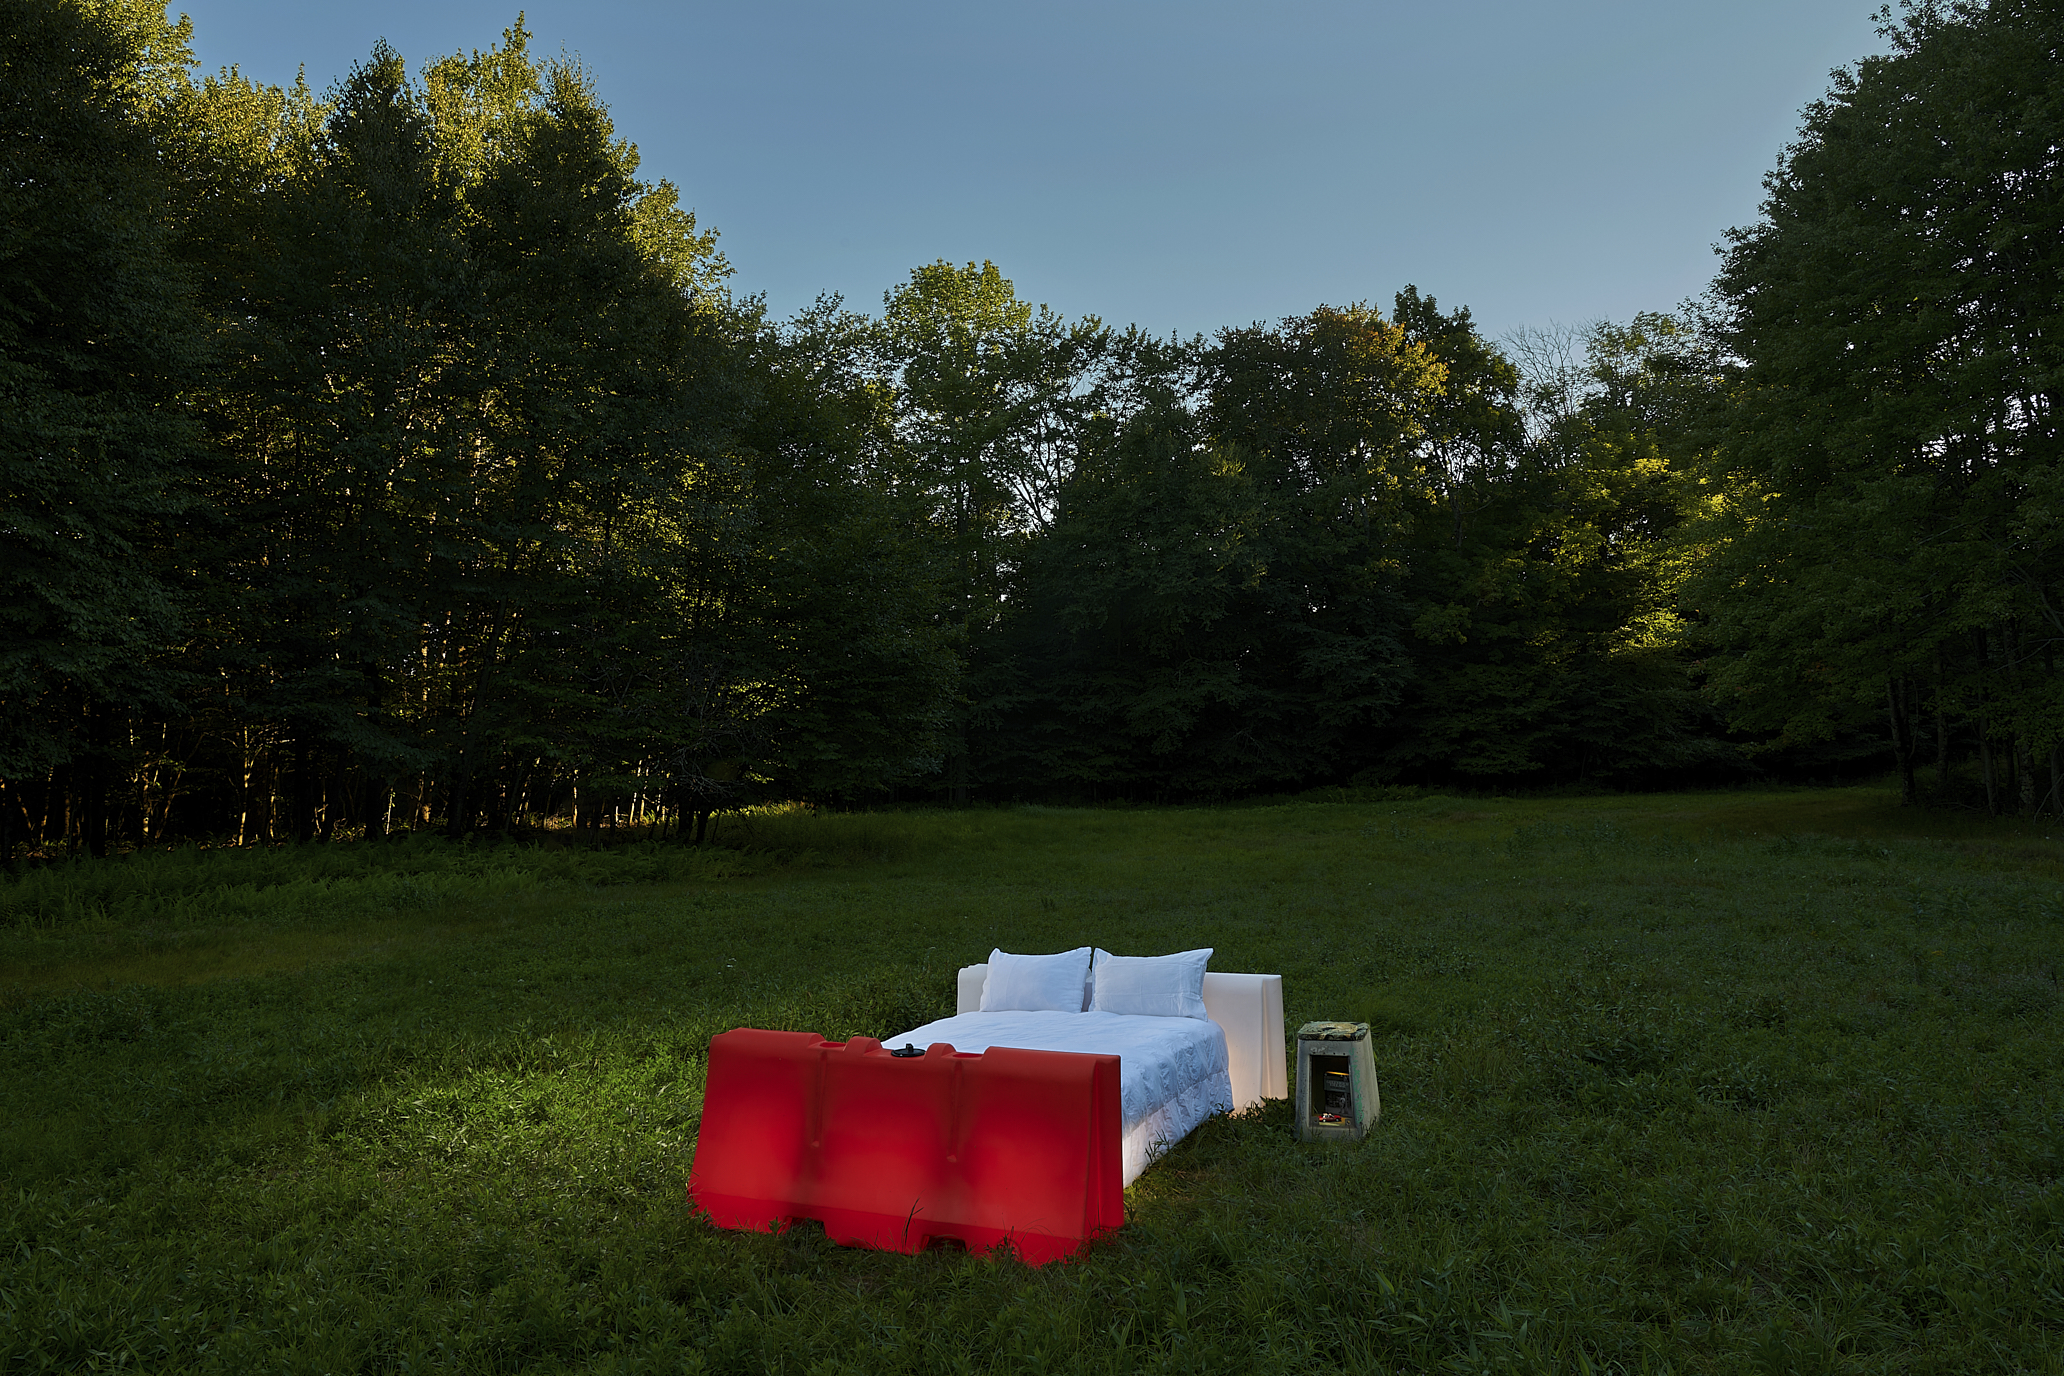 A bed in a grassy area with trees in the background. Carlo Sampietro